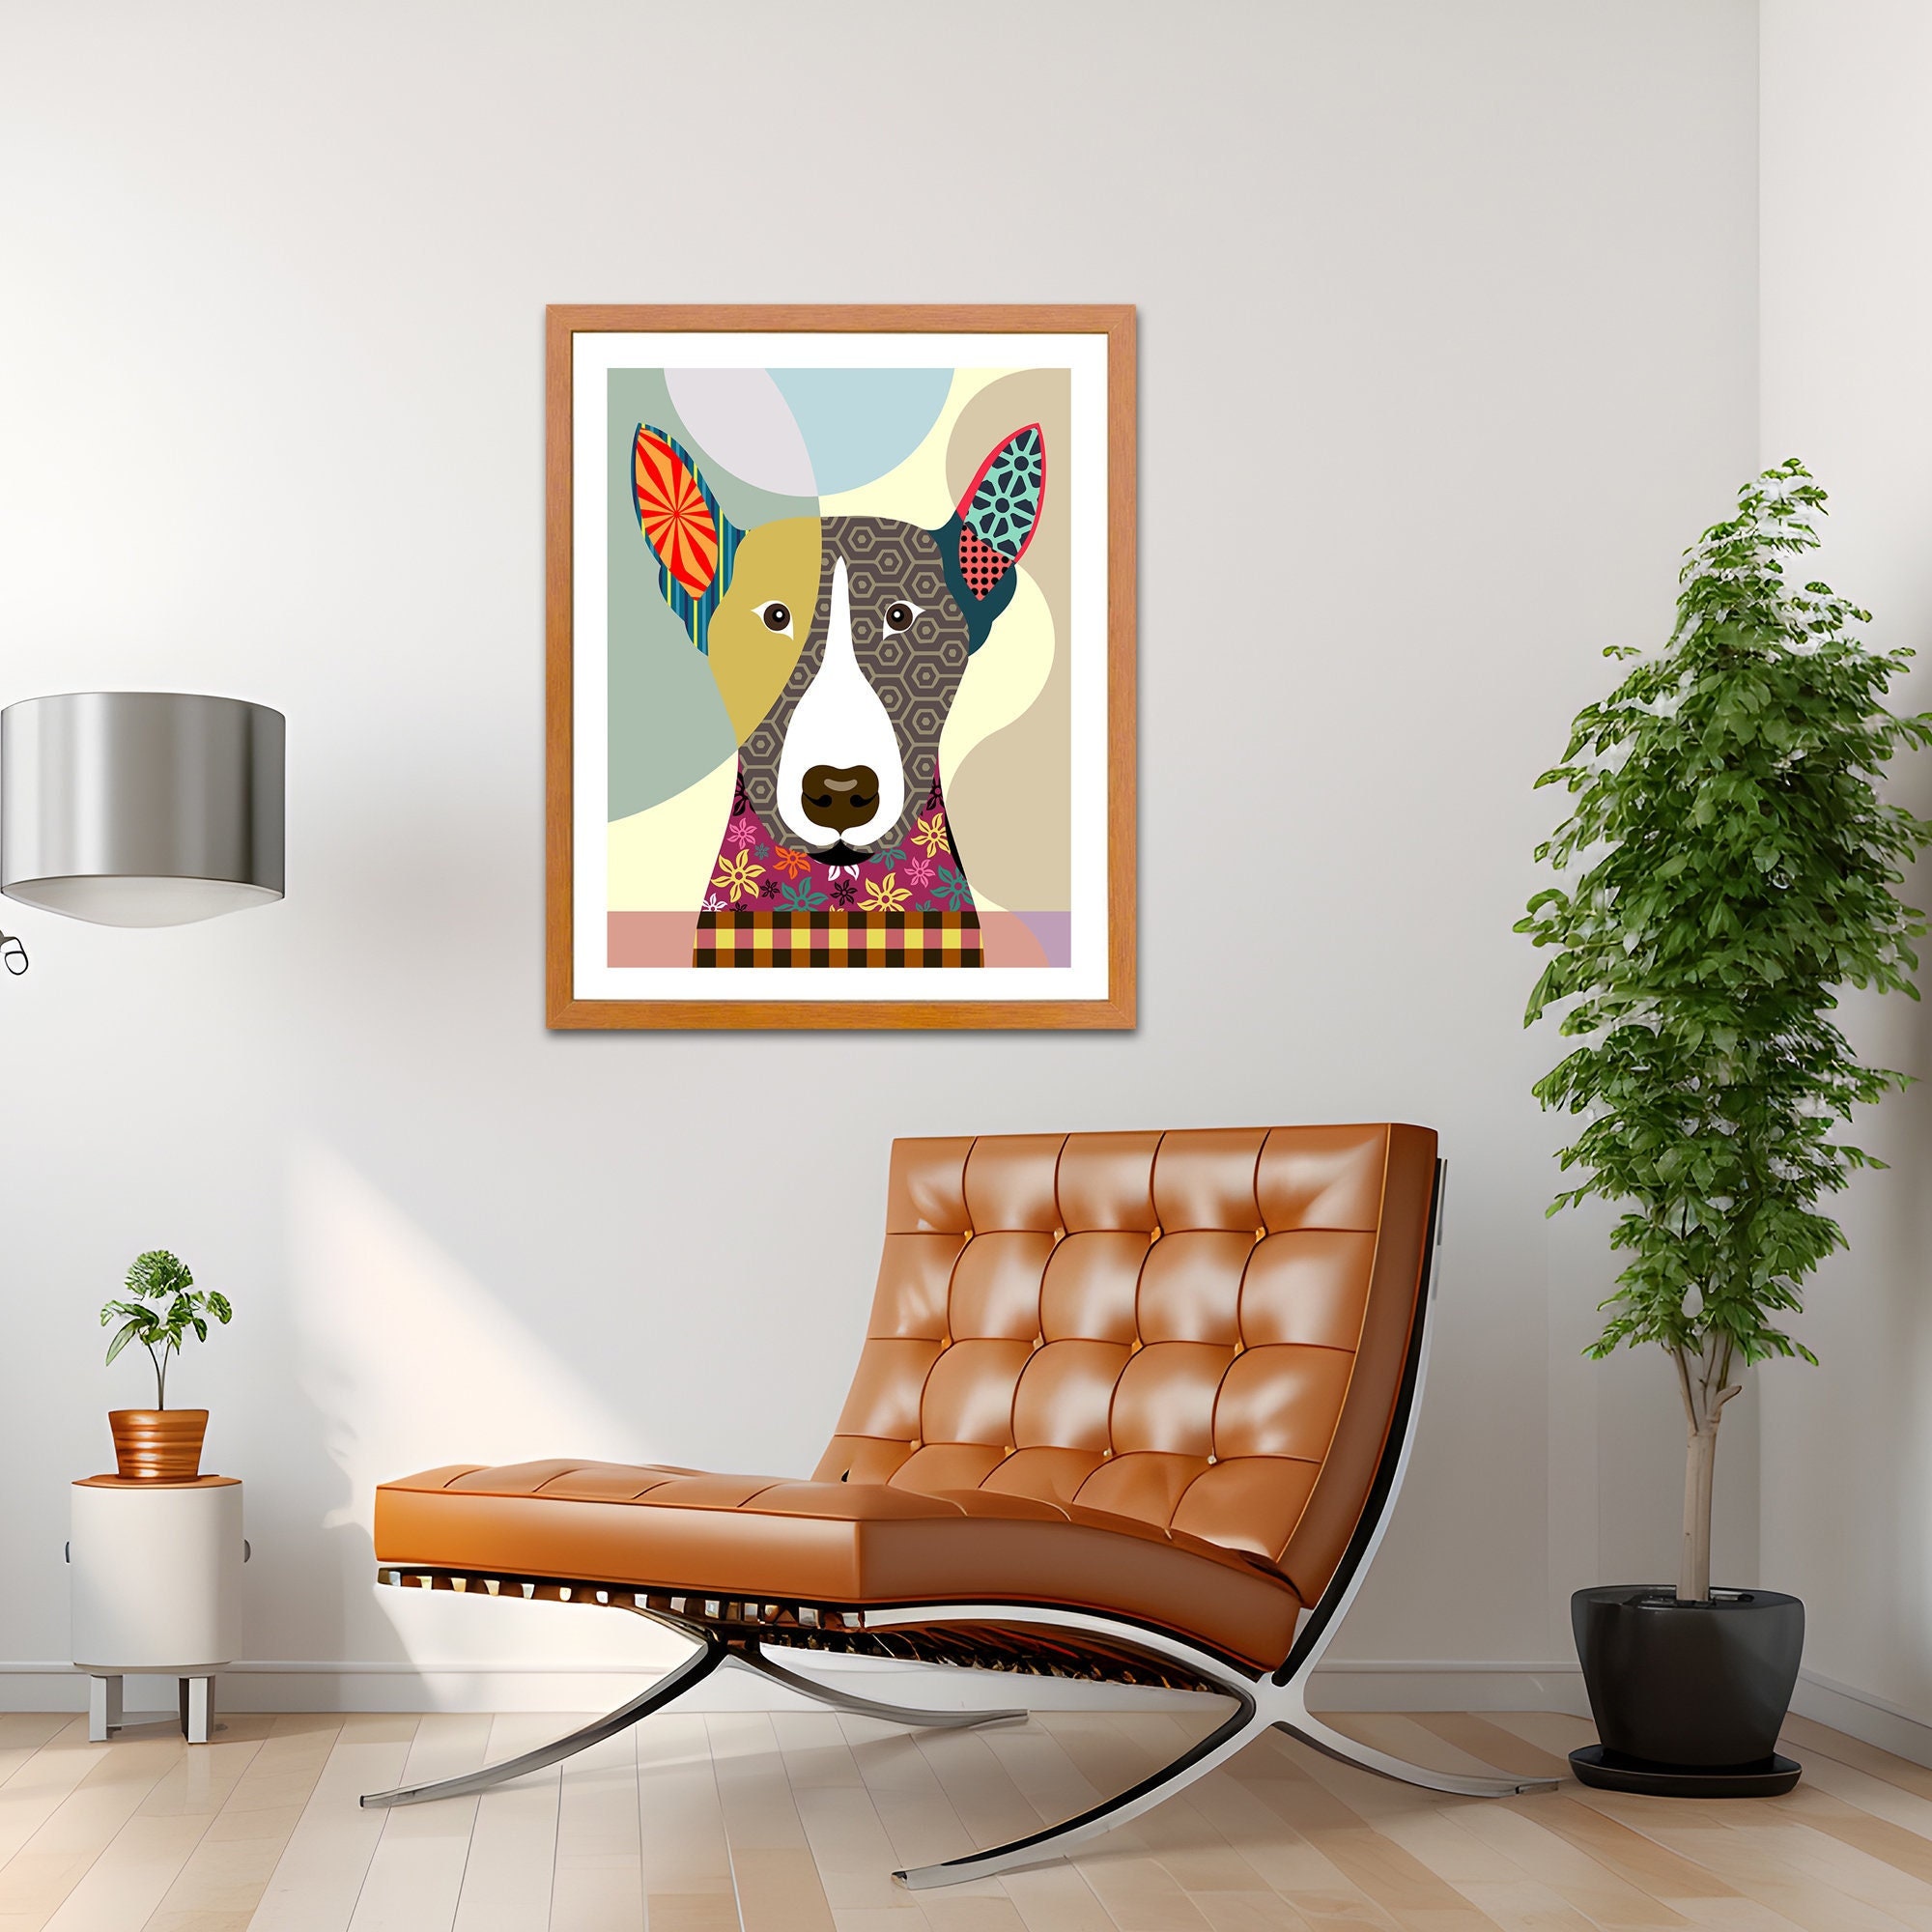 Bully - English Bull Terrier Poster for Sale by DoggyStyles